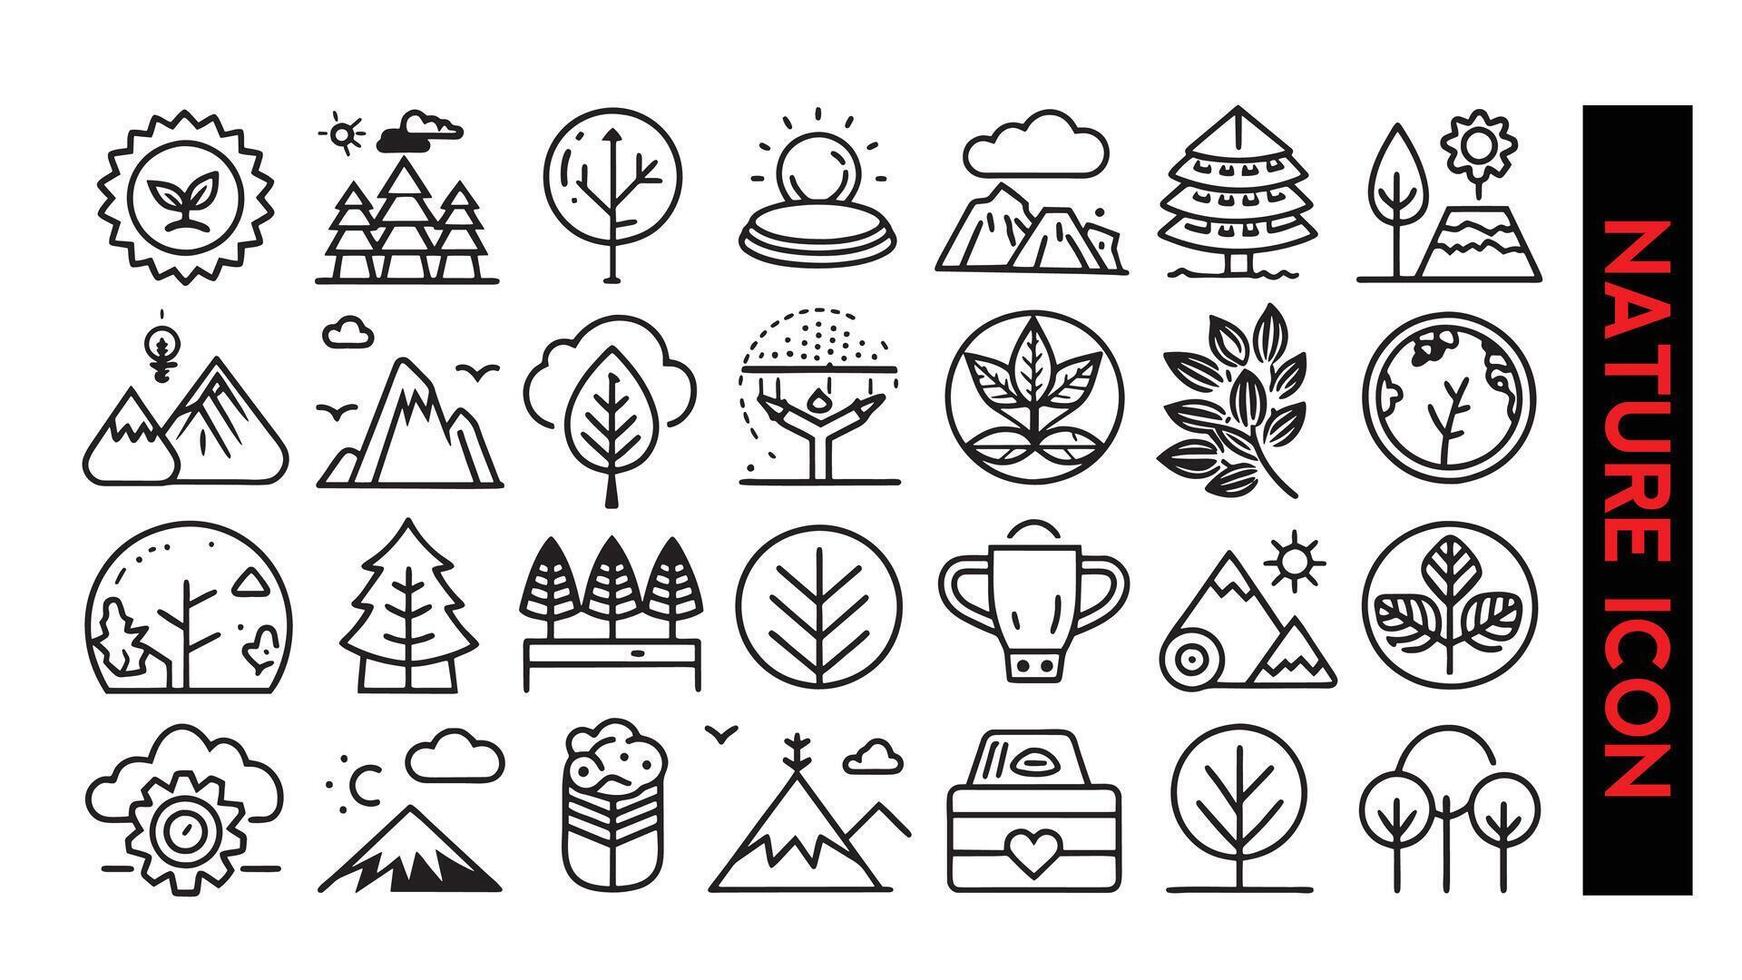 Ecology and environment icons set in thin line style. Vector illustration